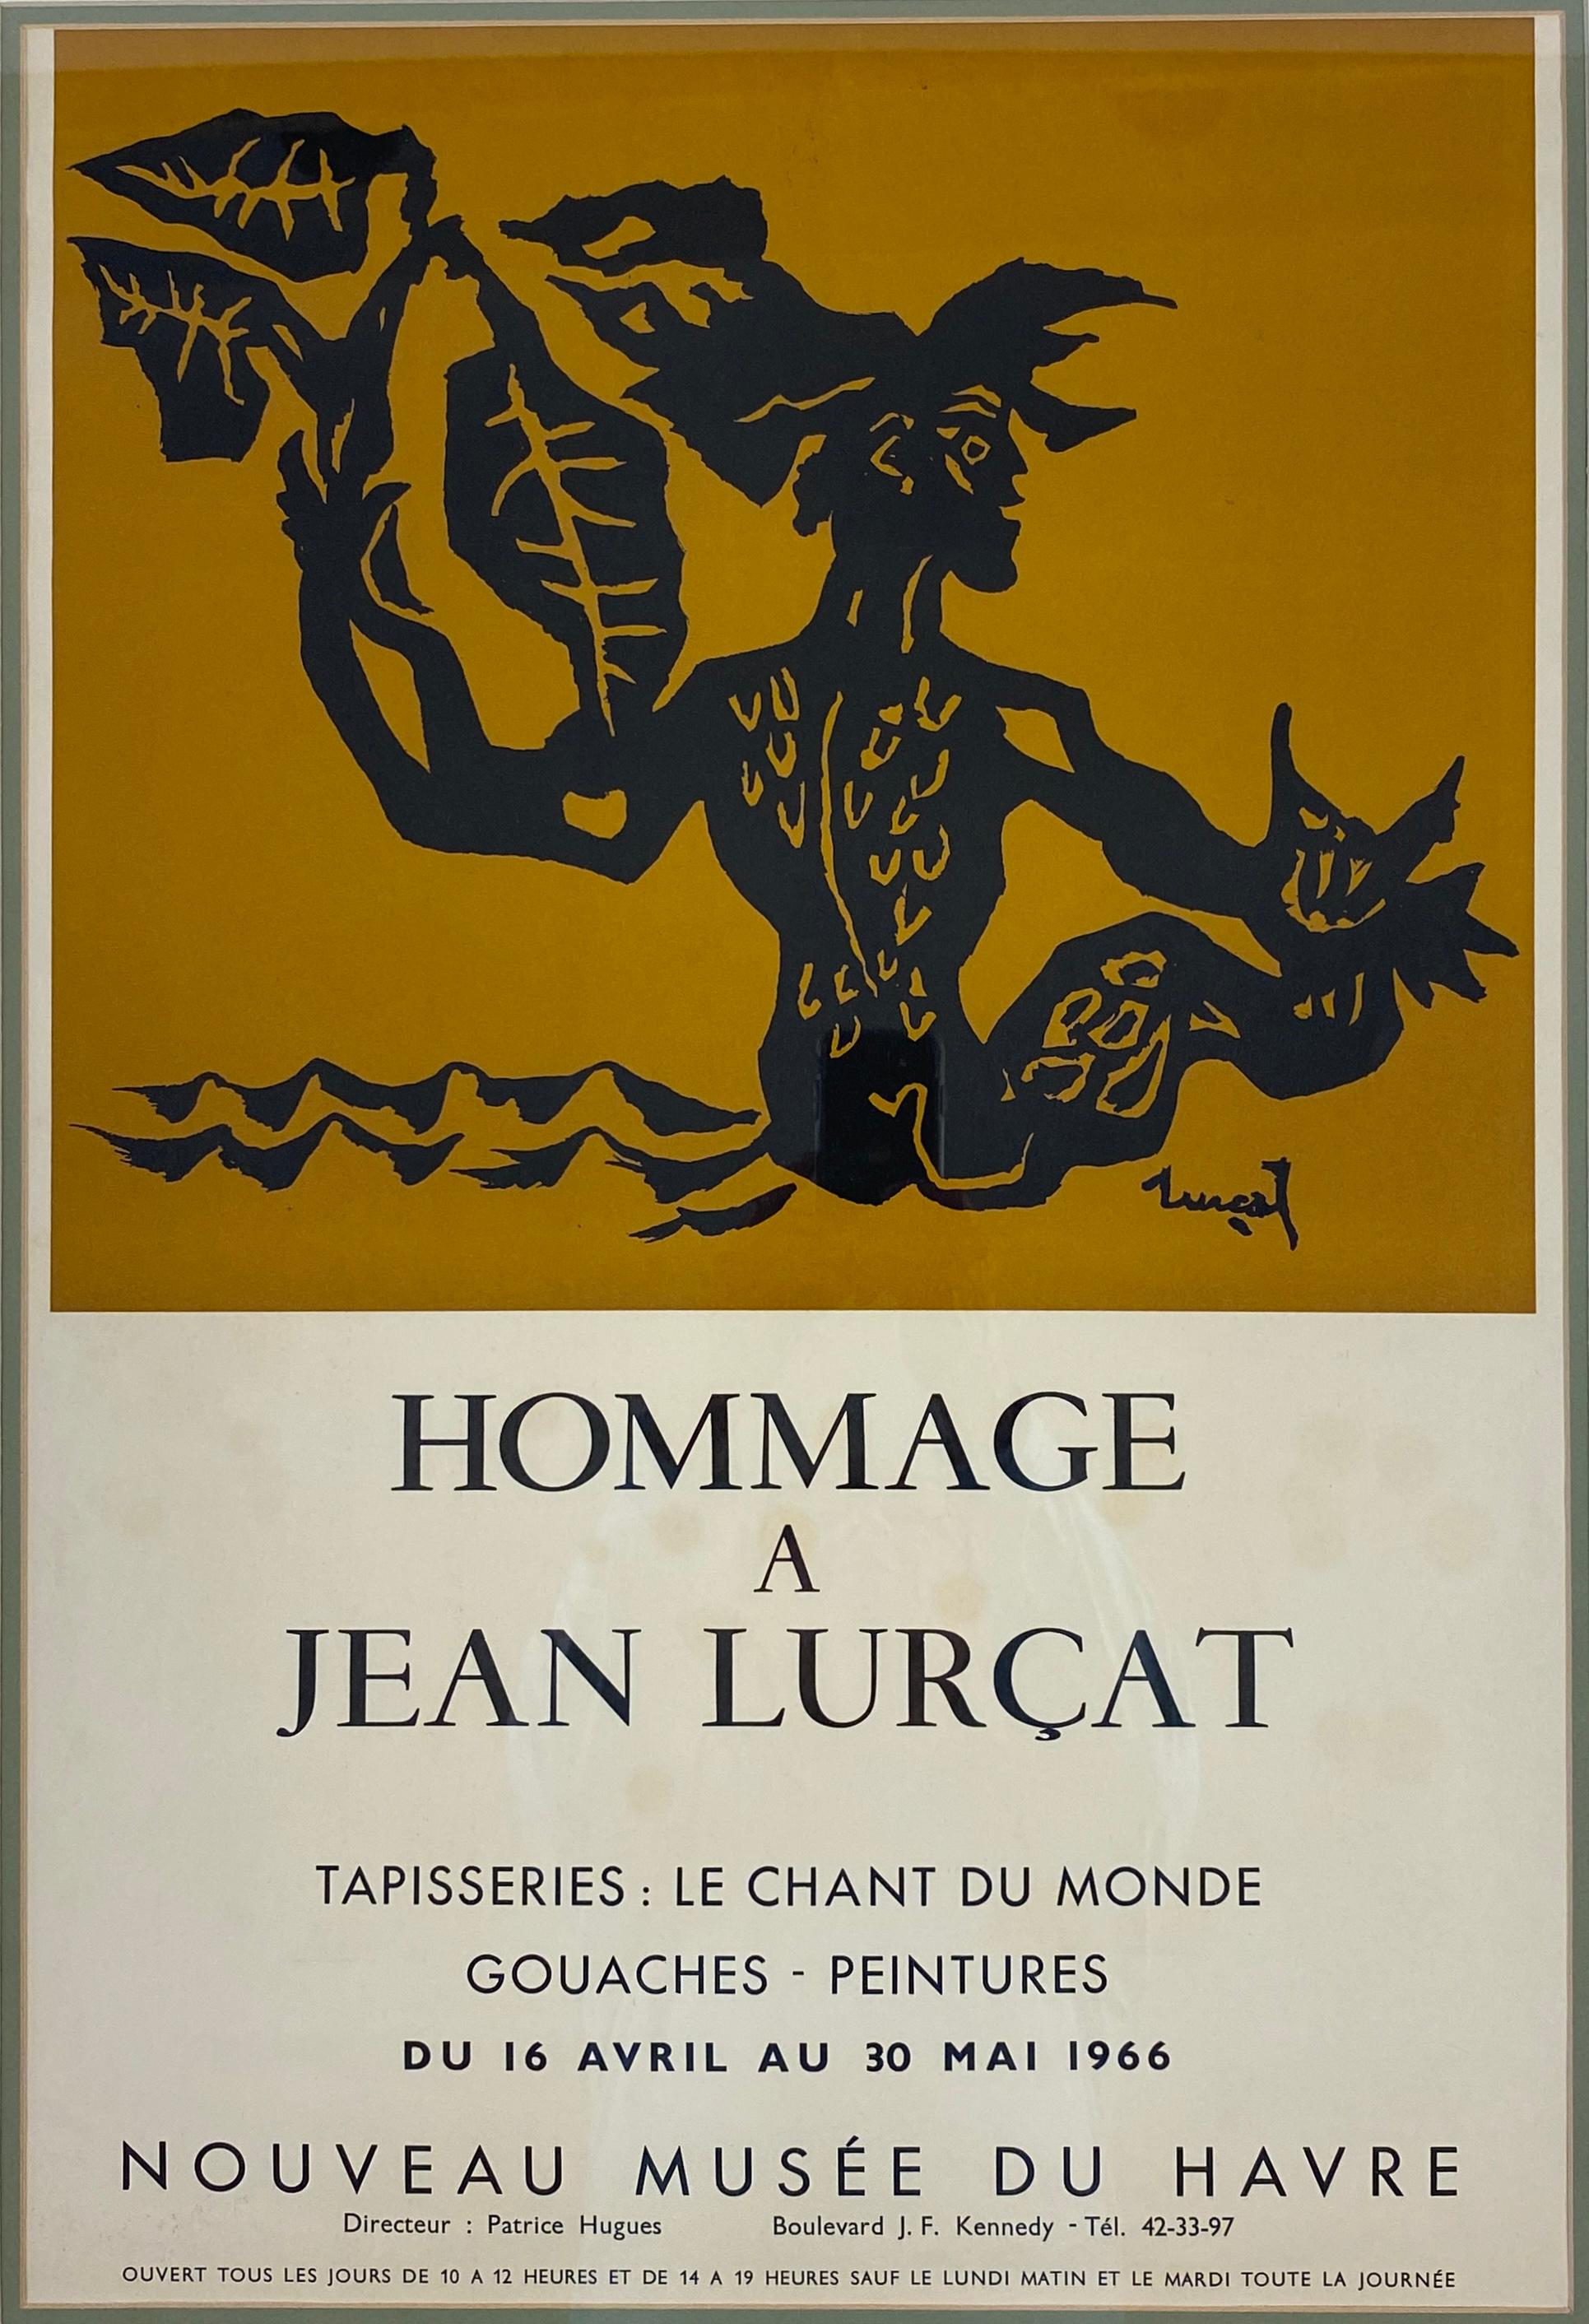 Wood French Mid-20th Century Art Poster Tribute to Jean Lurcat For Sale